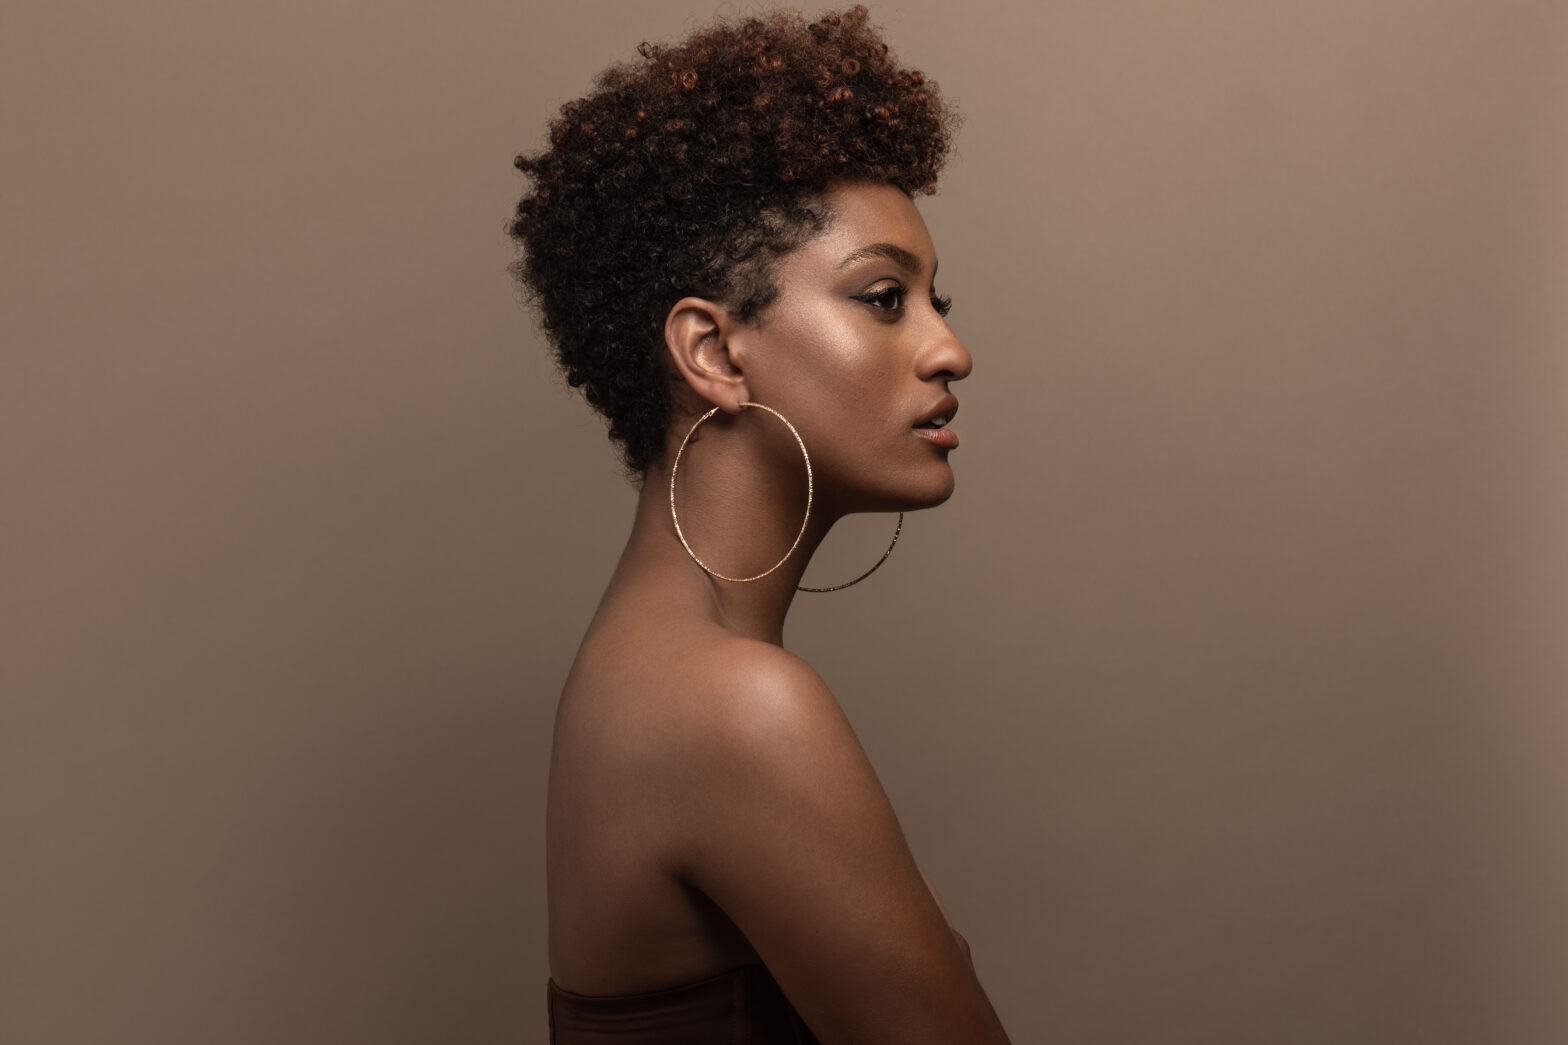 A side profile of a nude Black woman with an afro